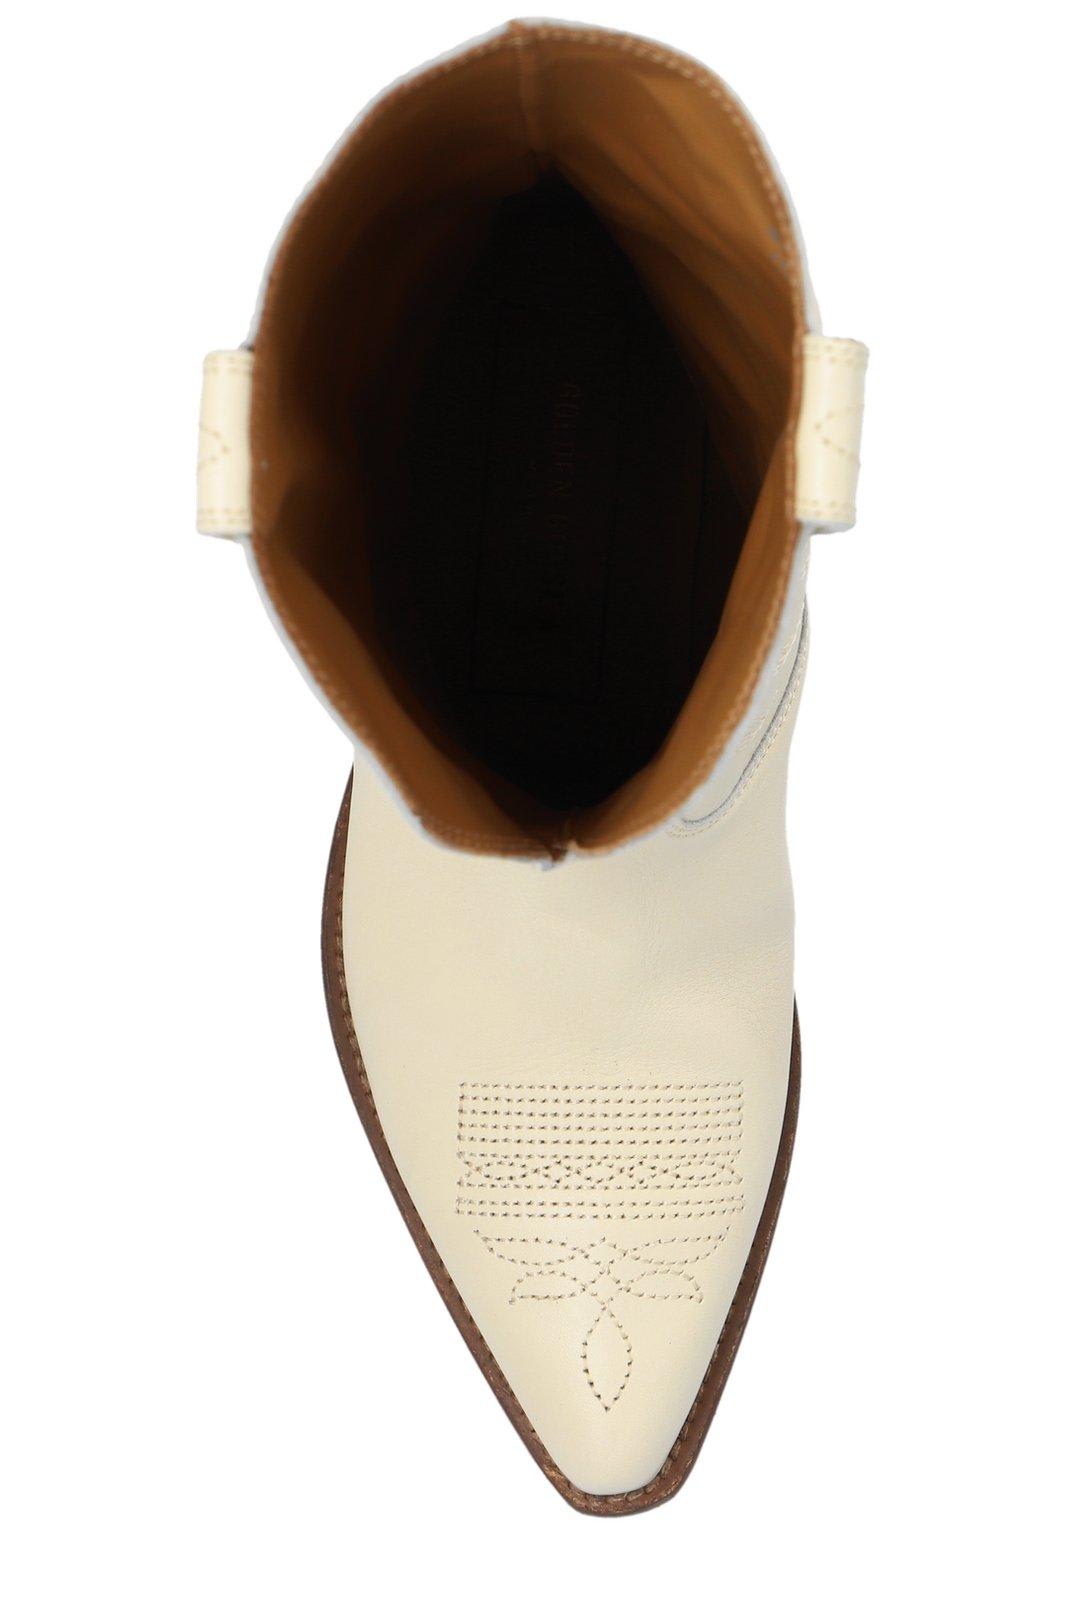 Shop Golden Goose Low Wish Star Cowboy Boots In Yellow Cream